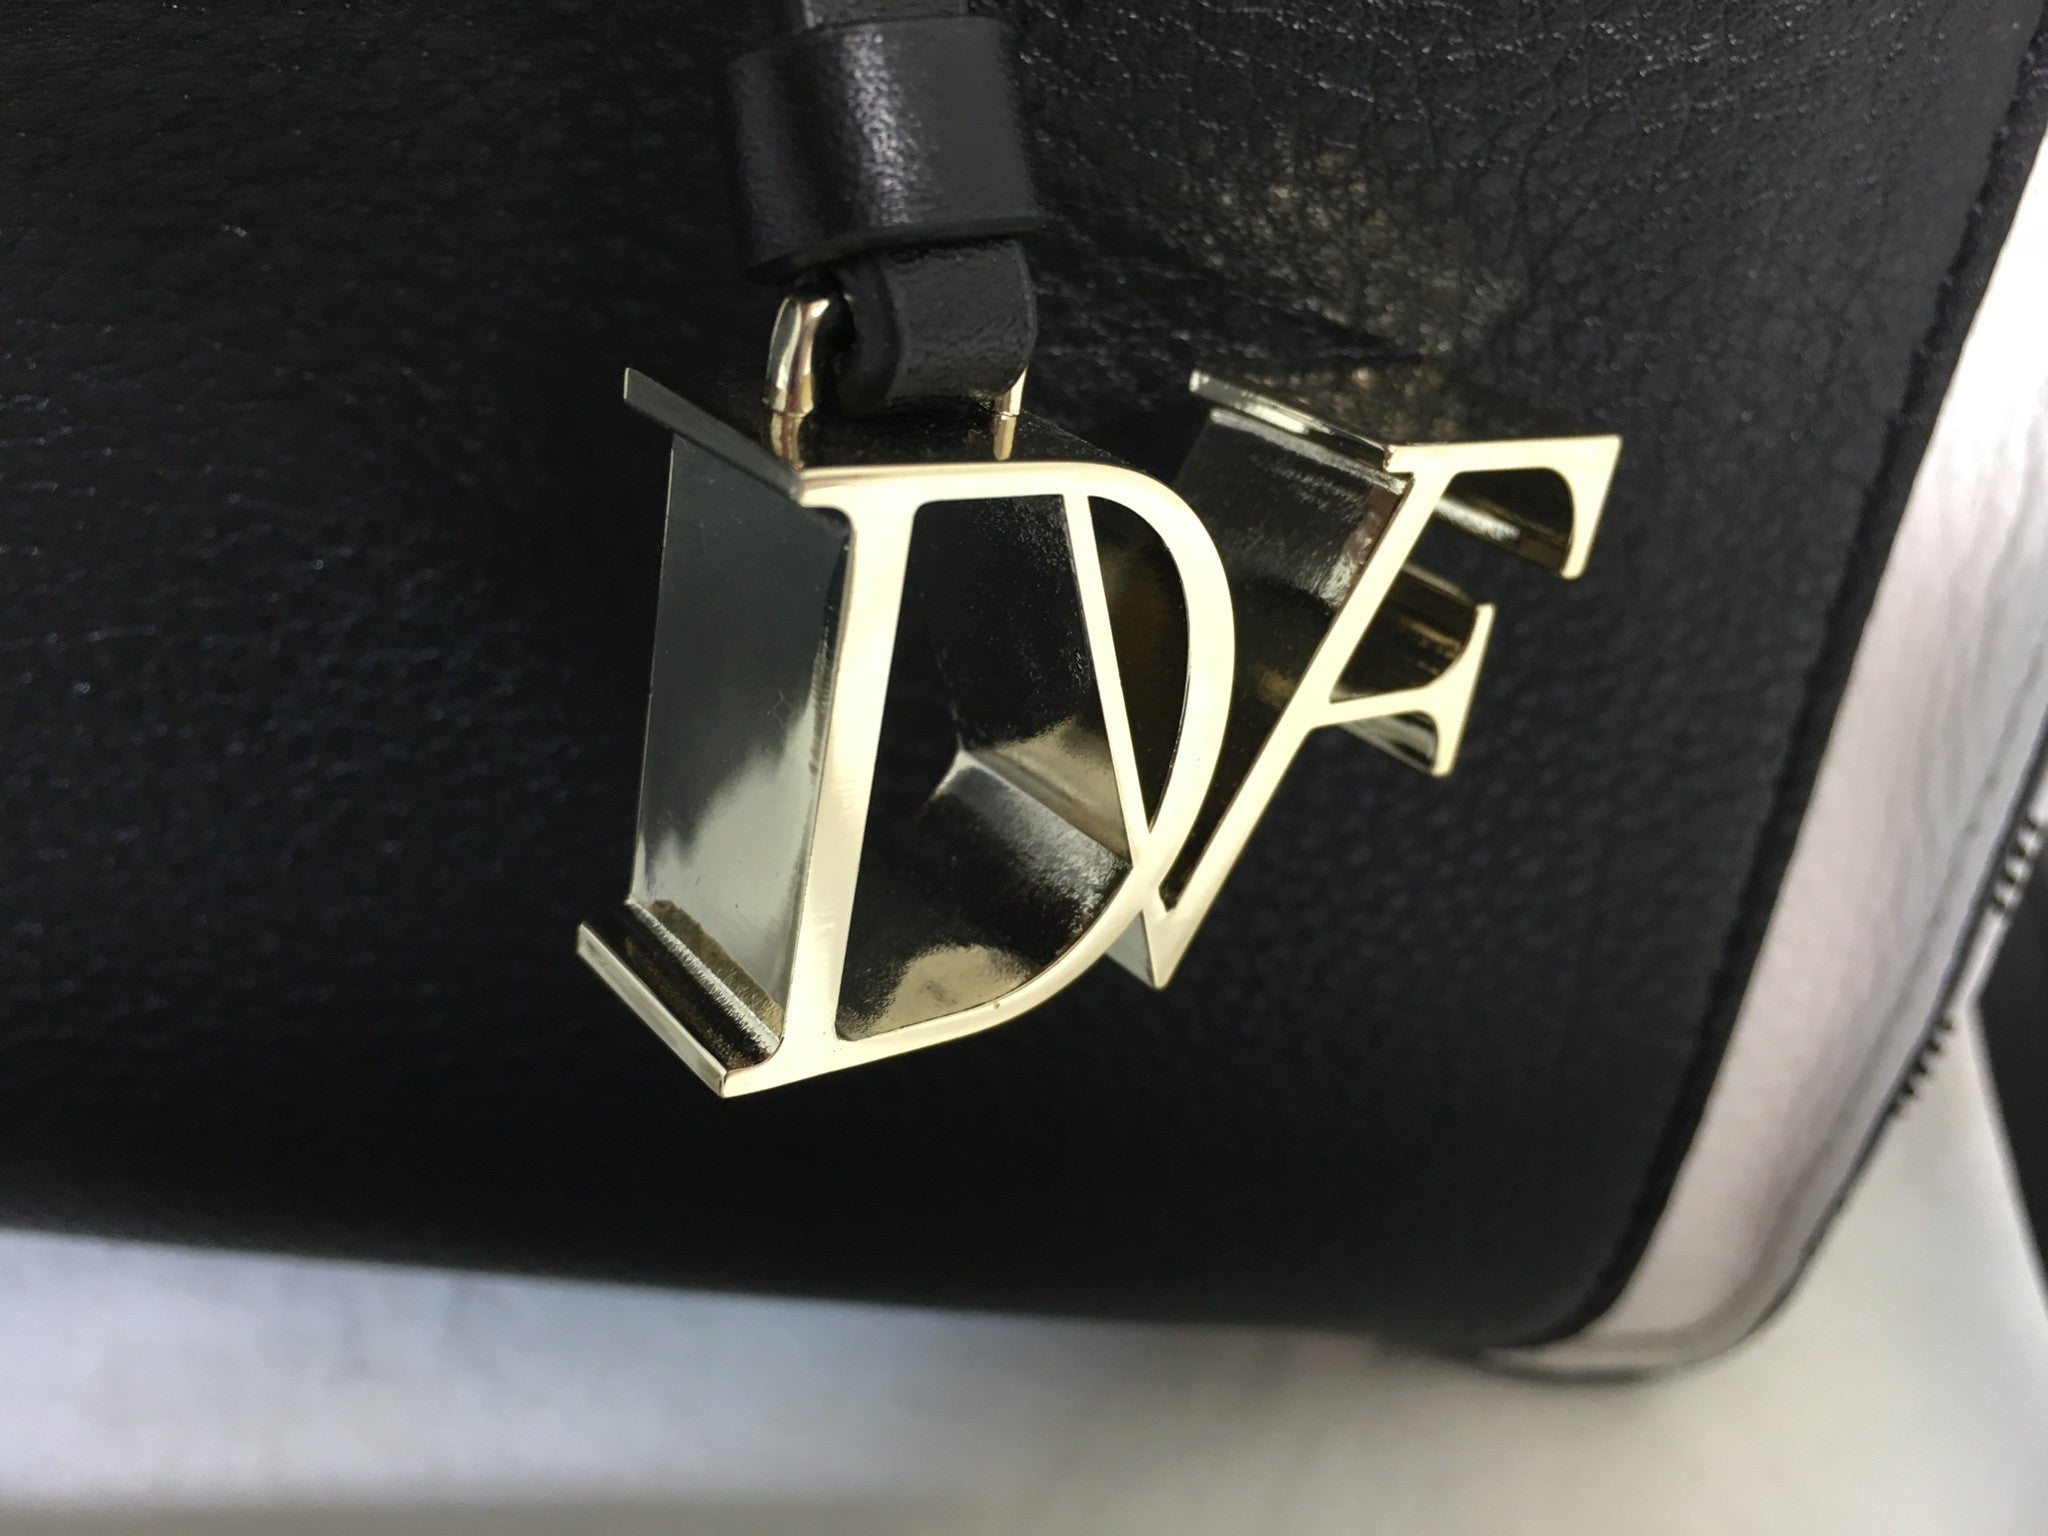 [ NEW ] DVF Voyage Gingham Leather Satchel Bag With Wristlet